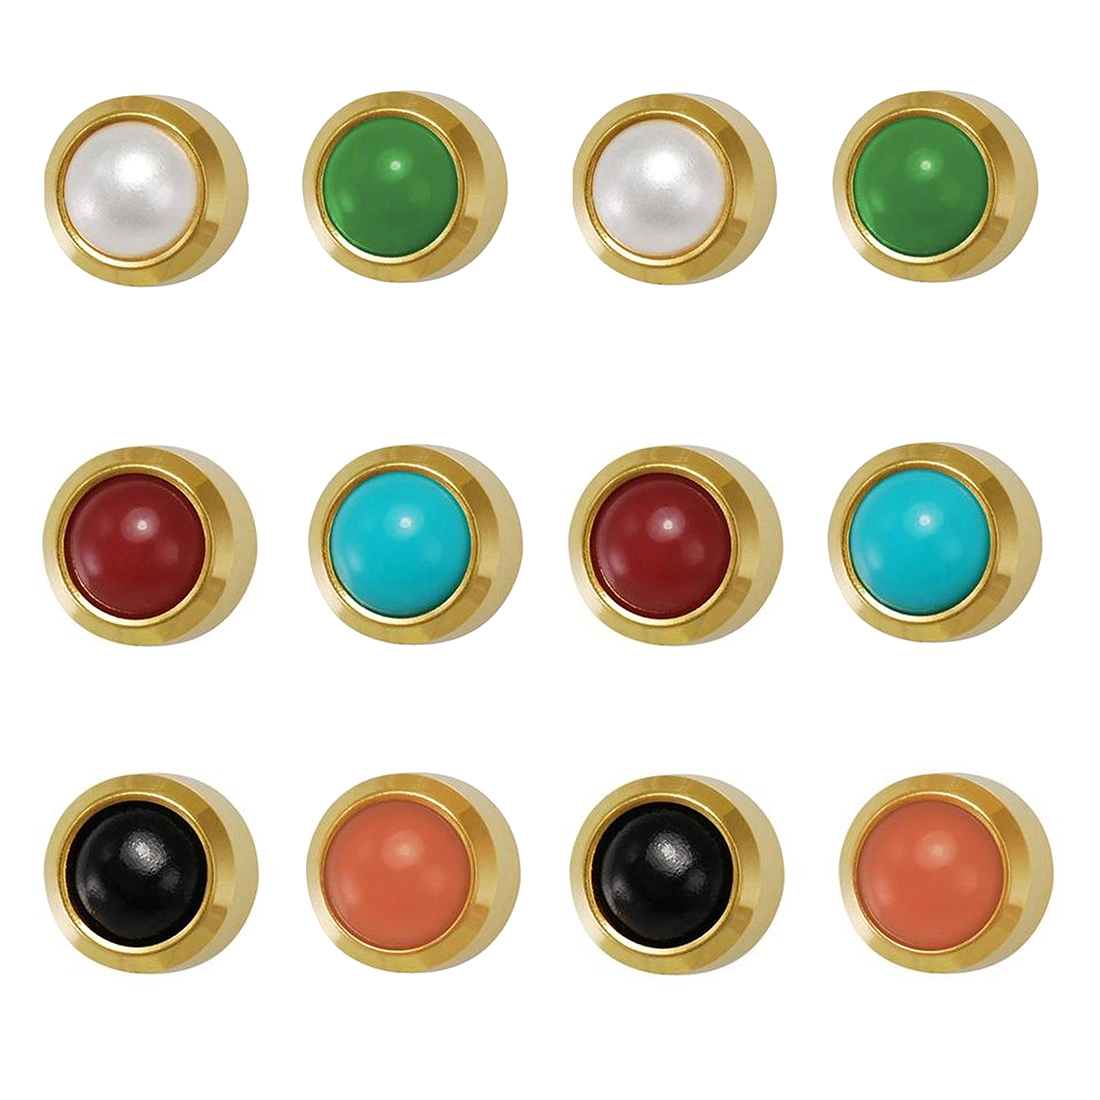 3MM Round Pearl – Assorted (Multi-color) | 24K Gold Plated Piercing Earrings | Studex Universal Machine (12 Pair Kit)